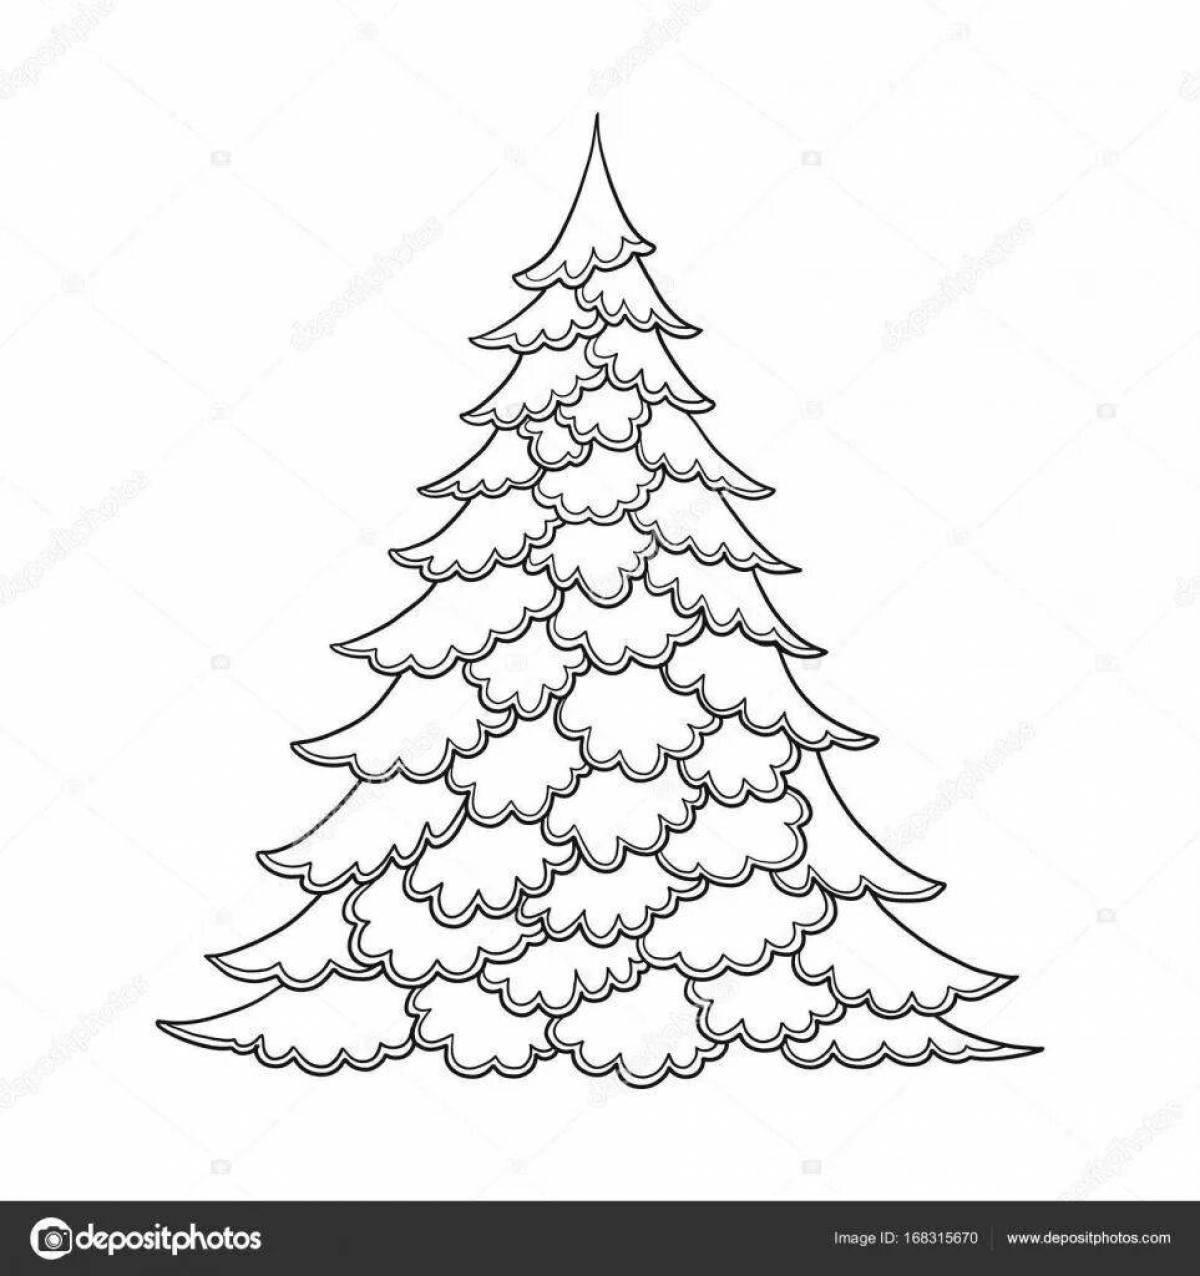 Coloring page charming tree in the snow